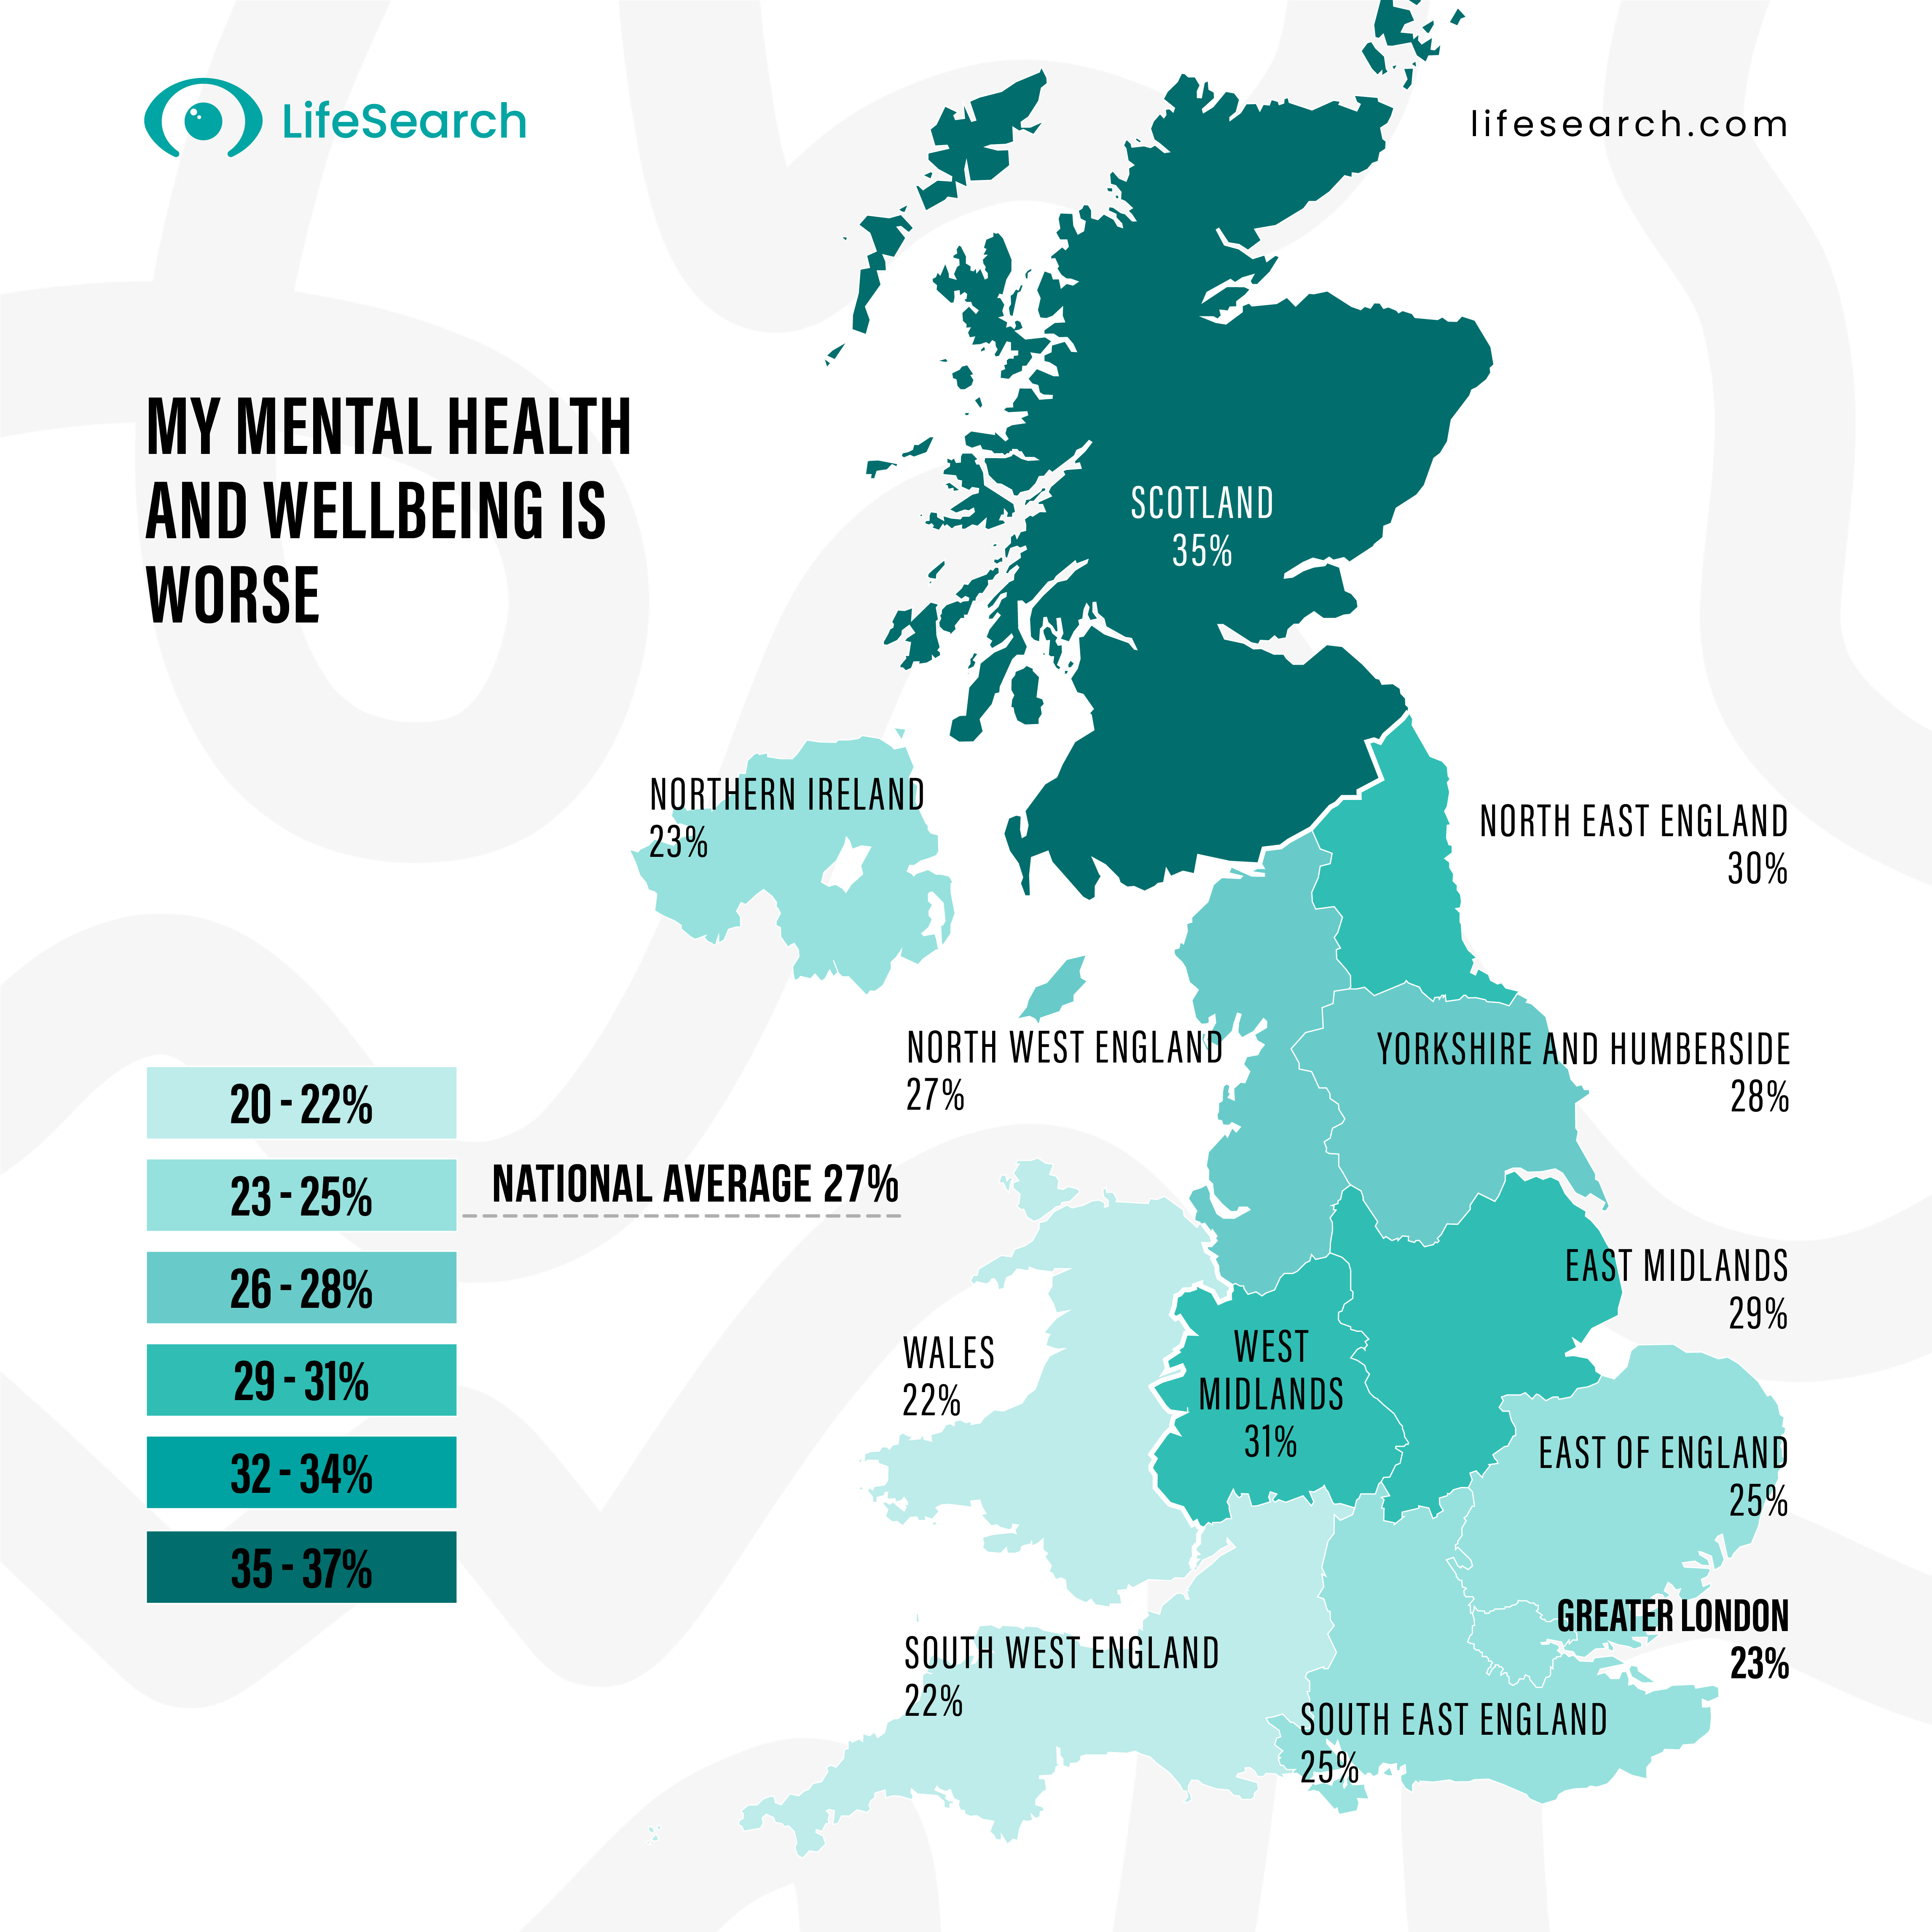 Map of UK showing percentage mental health has got worse by region